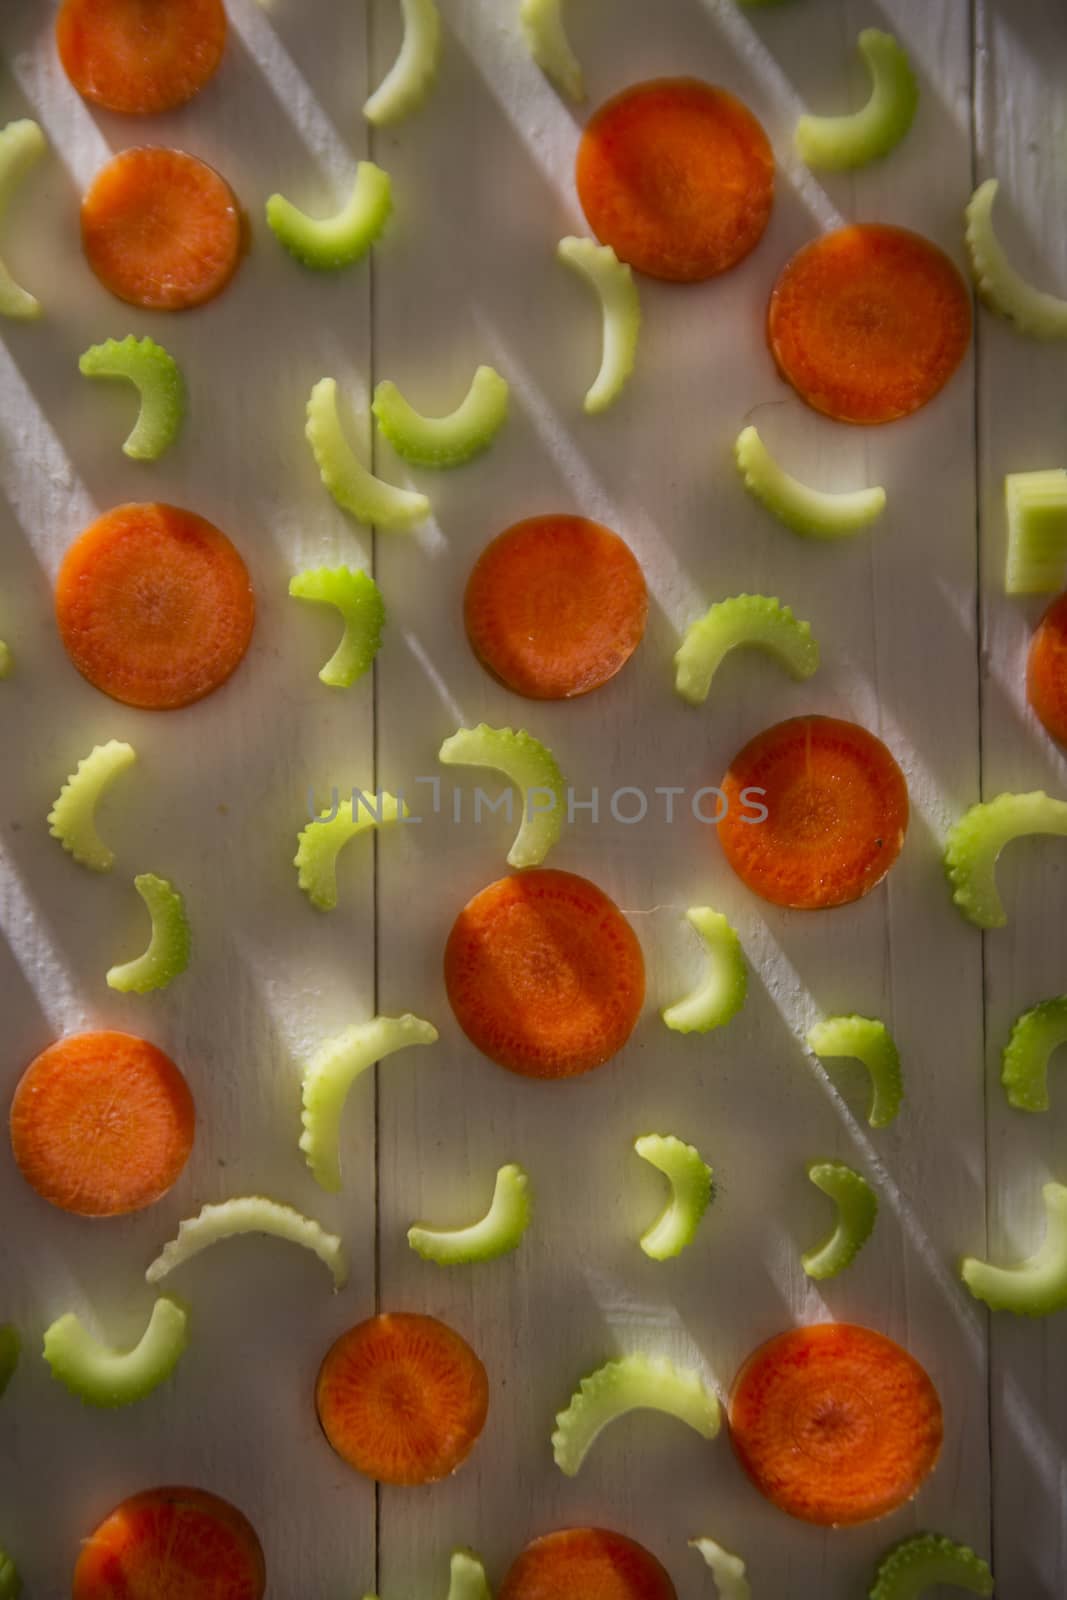 Presentation of vegetables celery and carrots cut into small slices